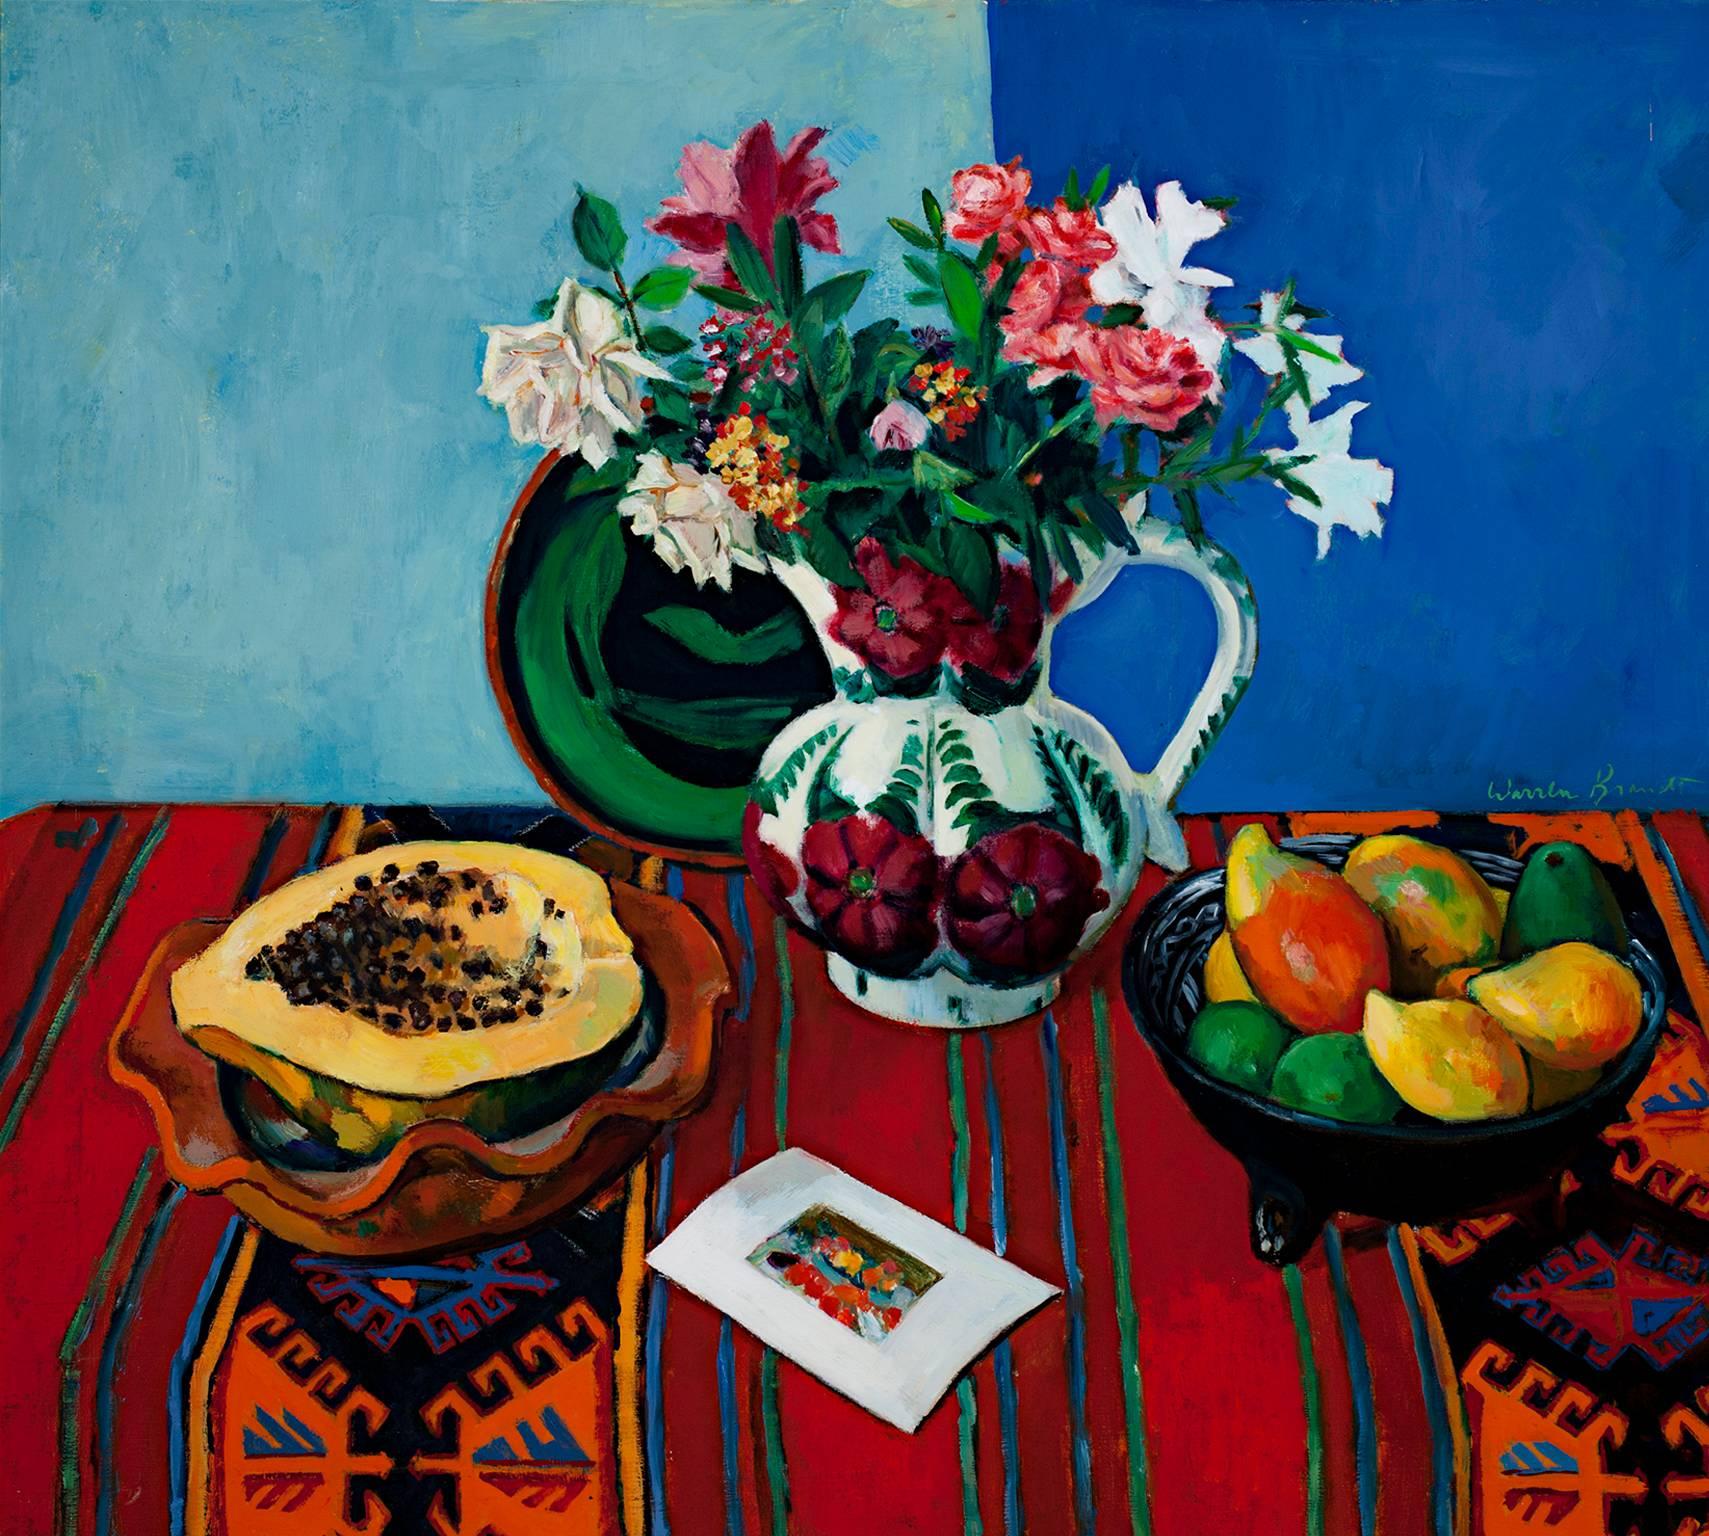 "Papaya & Mexican Pitcher" is an original signed oil painting by Warren Brandt. Brandt, an American painter originally influenced by Abstract Expressionism, became a "child of Matisse" around 1966-67 by adopting the realist mode of he French artist